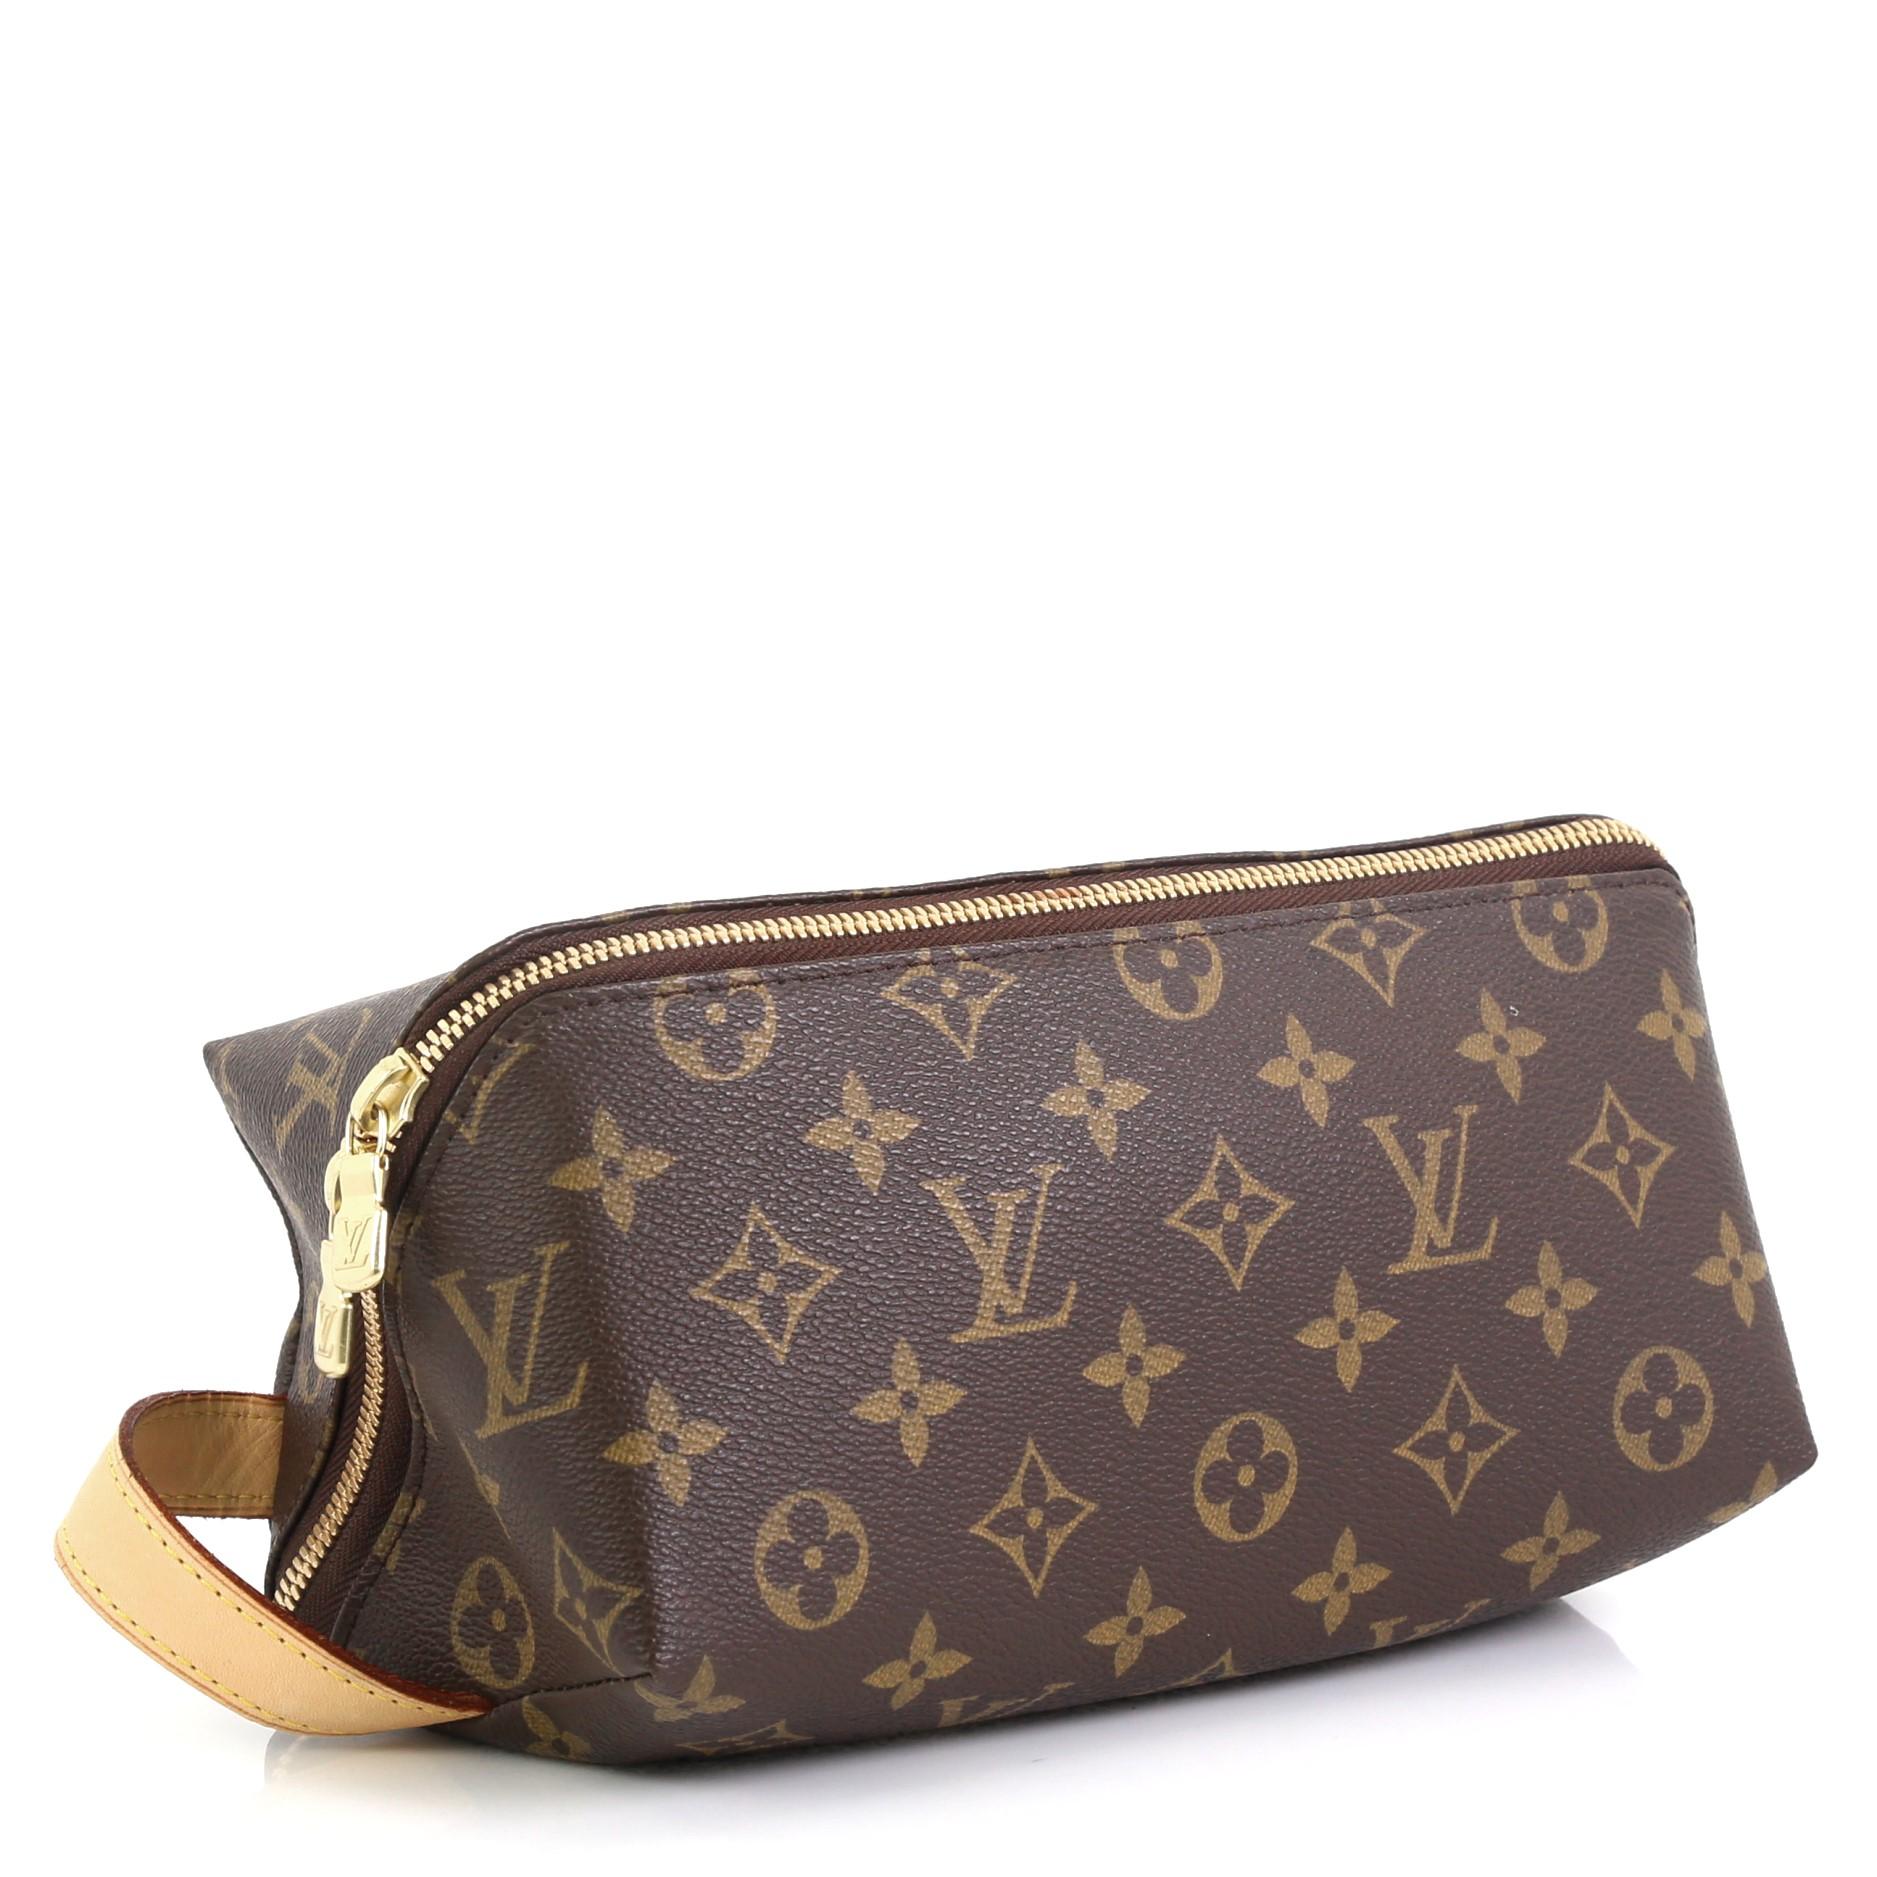 This Louis Vuitton Shoe Care Kit Monogram Canvas, crafted in brown monogram coated canvas, features a leather handle, and gold-tone hardware. Its zip closure opens to a brown leather interior. Authenticity code reads: CT1016 

Estimated Retail